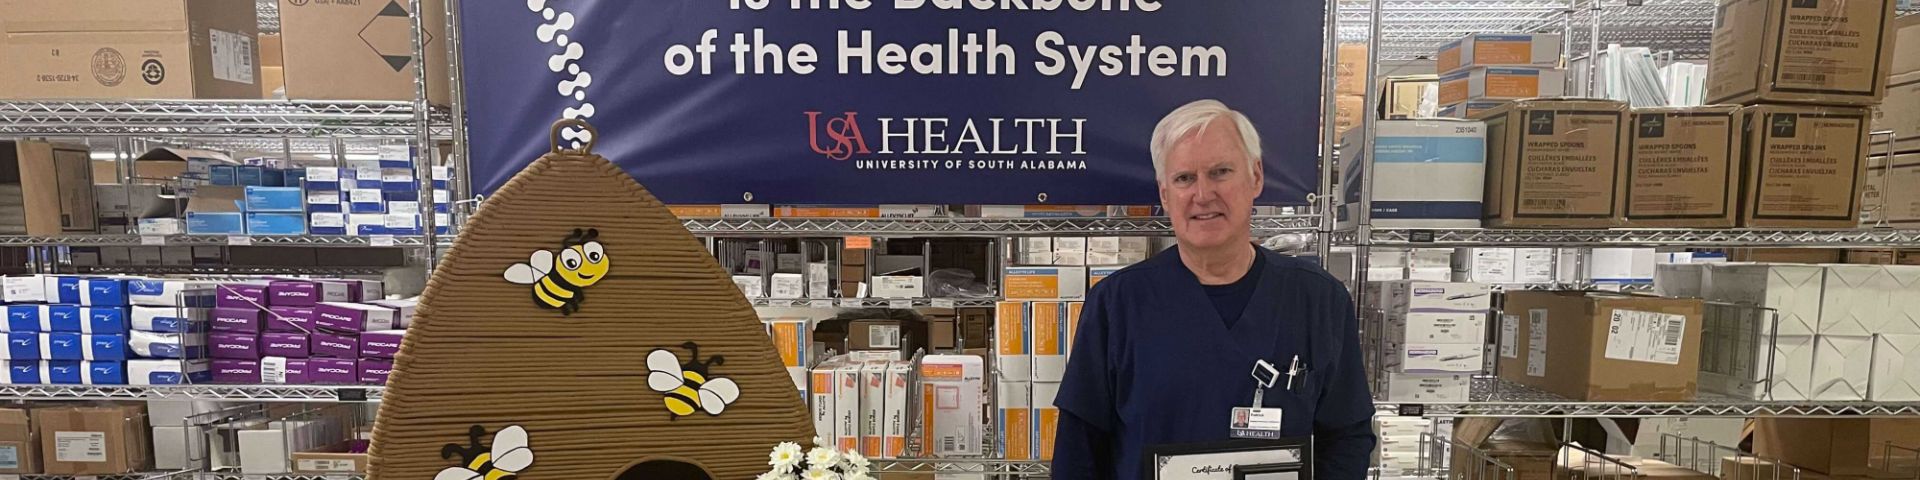 USA Health Recognizes You: January 30